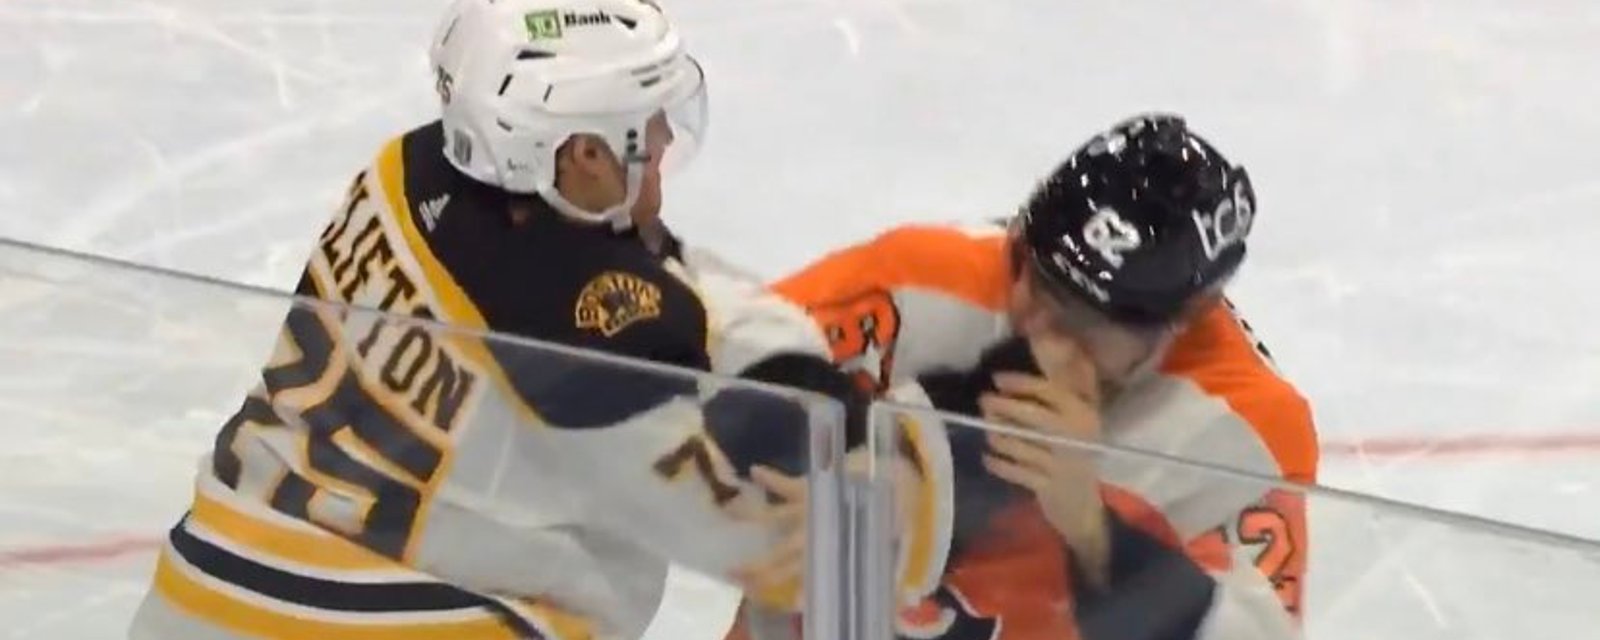 Bruins’ Clifton feeding some lunch with heavy blows to Aube-Kubel